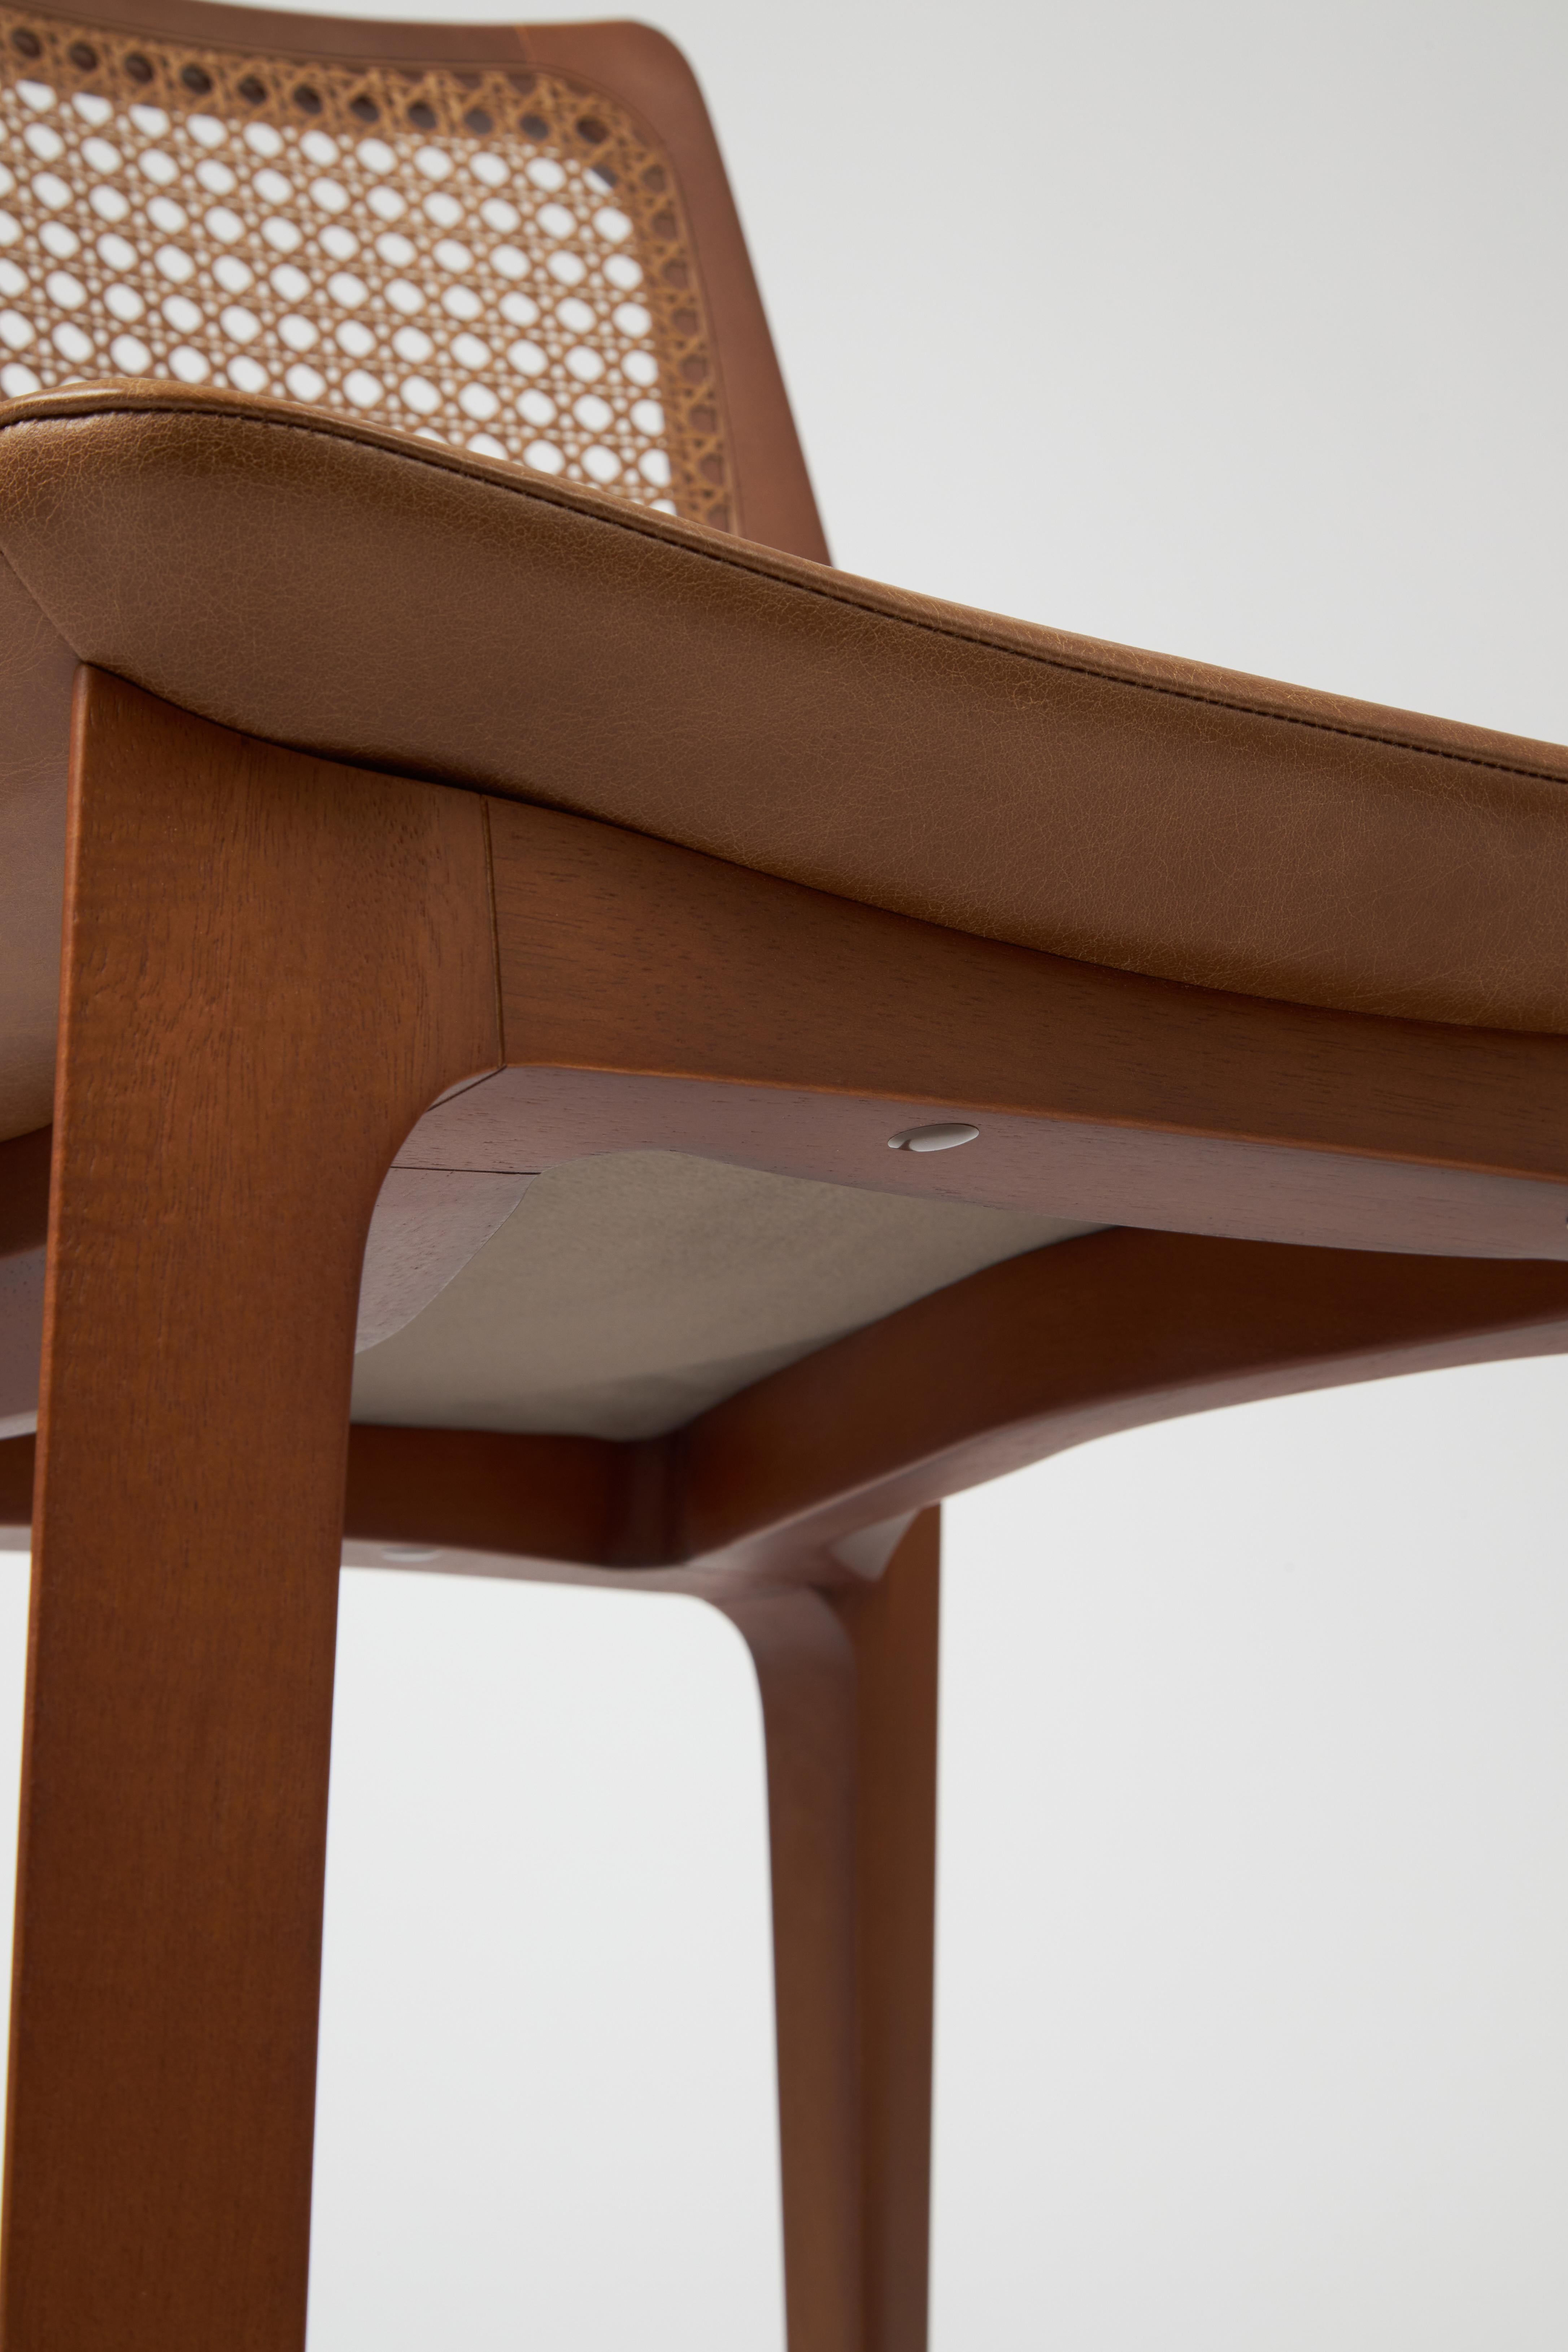 Carved Modern Style Aurora Chair Sculpted in Walnut Finish No Arms, leather seating For Sale